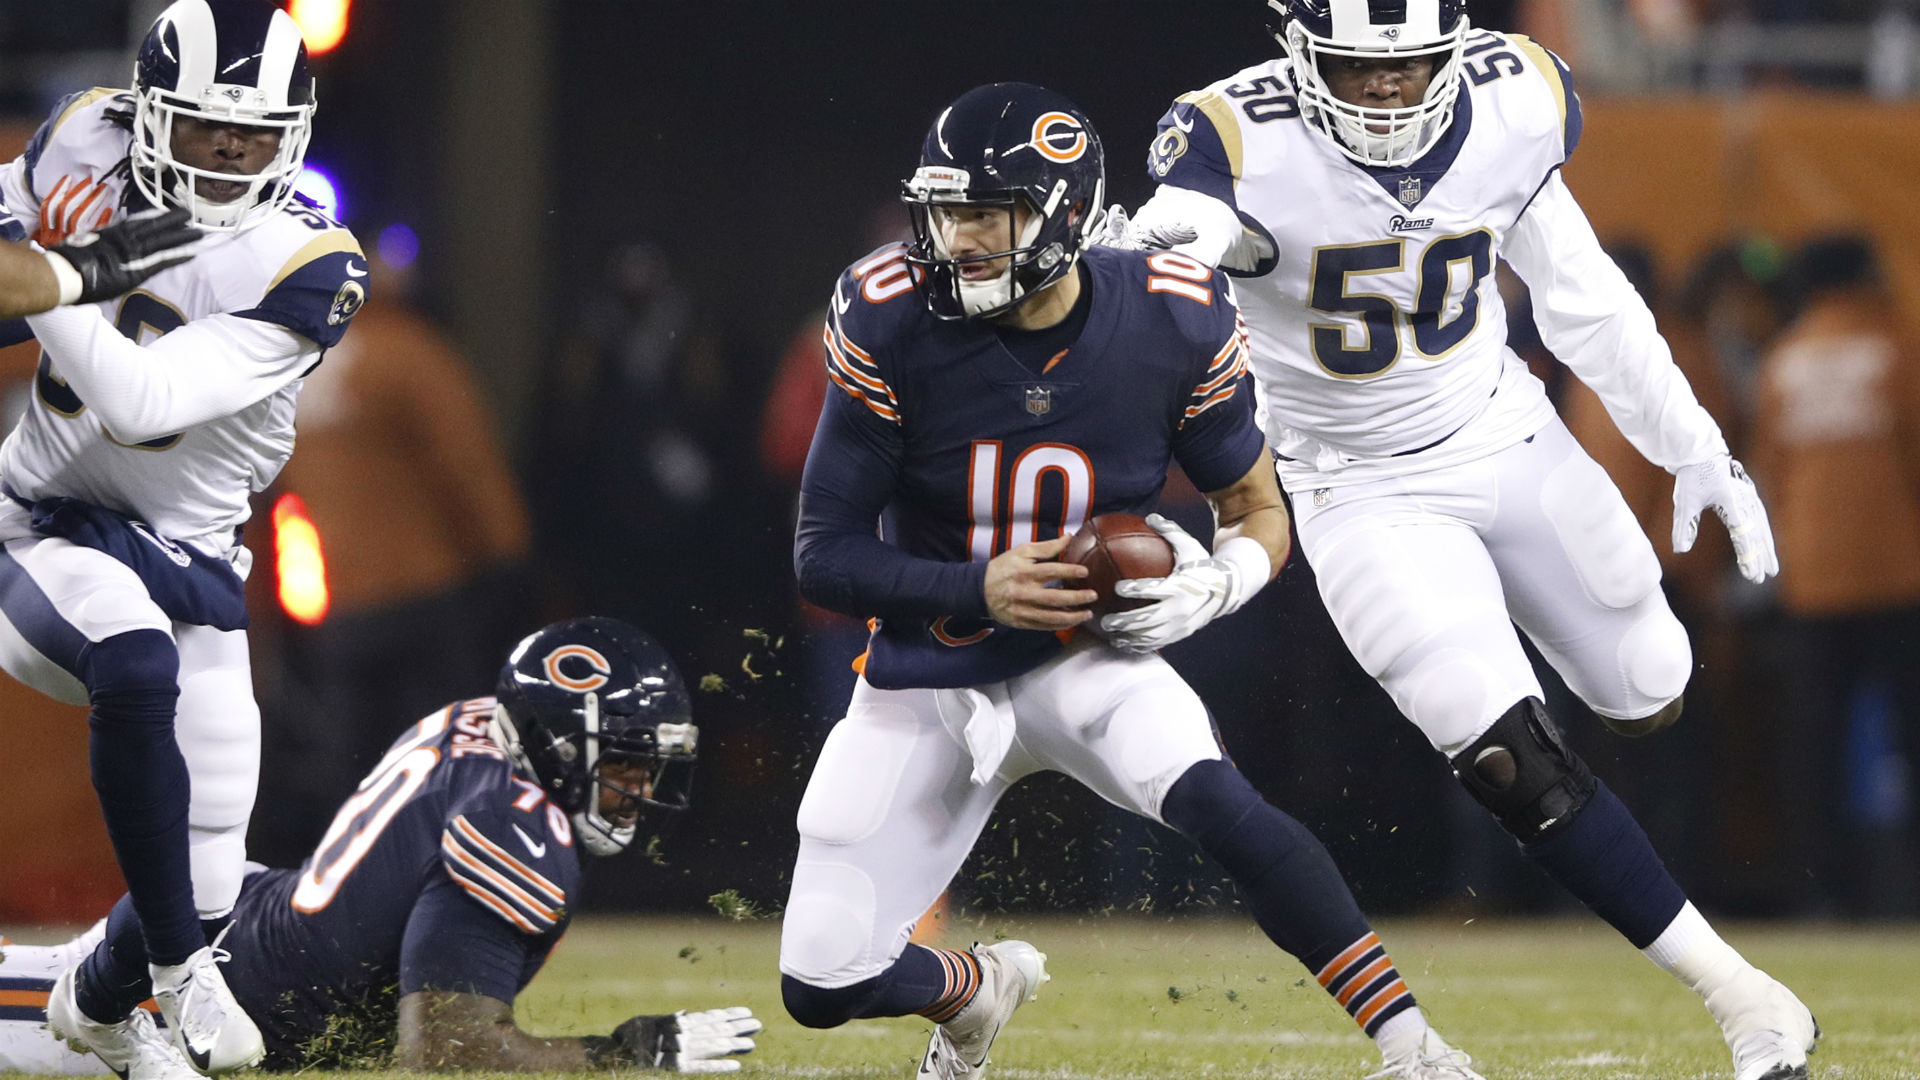 NFL Ranks Two Chicago Bears Games Among Top 10 Most-Anticipated1920 x 1080